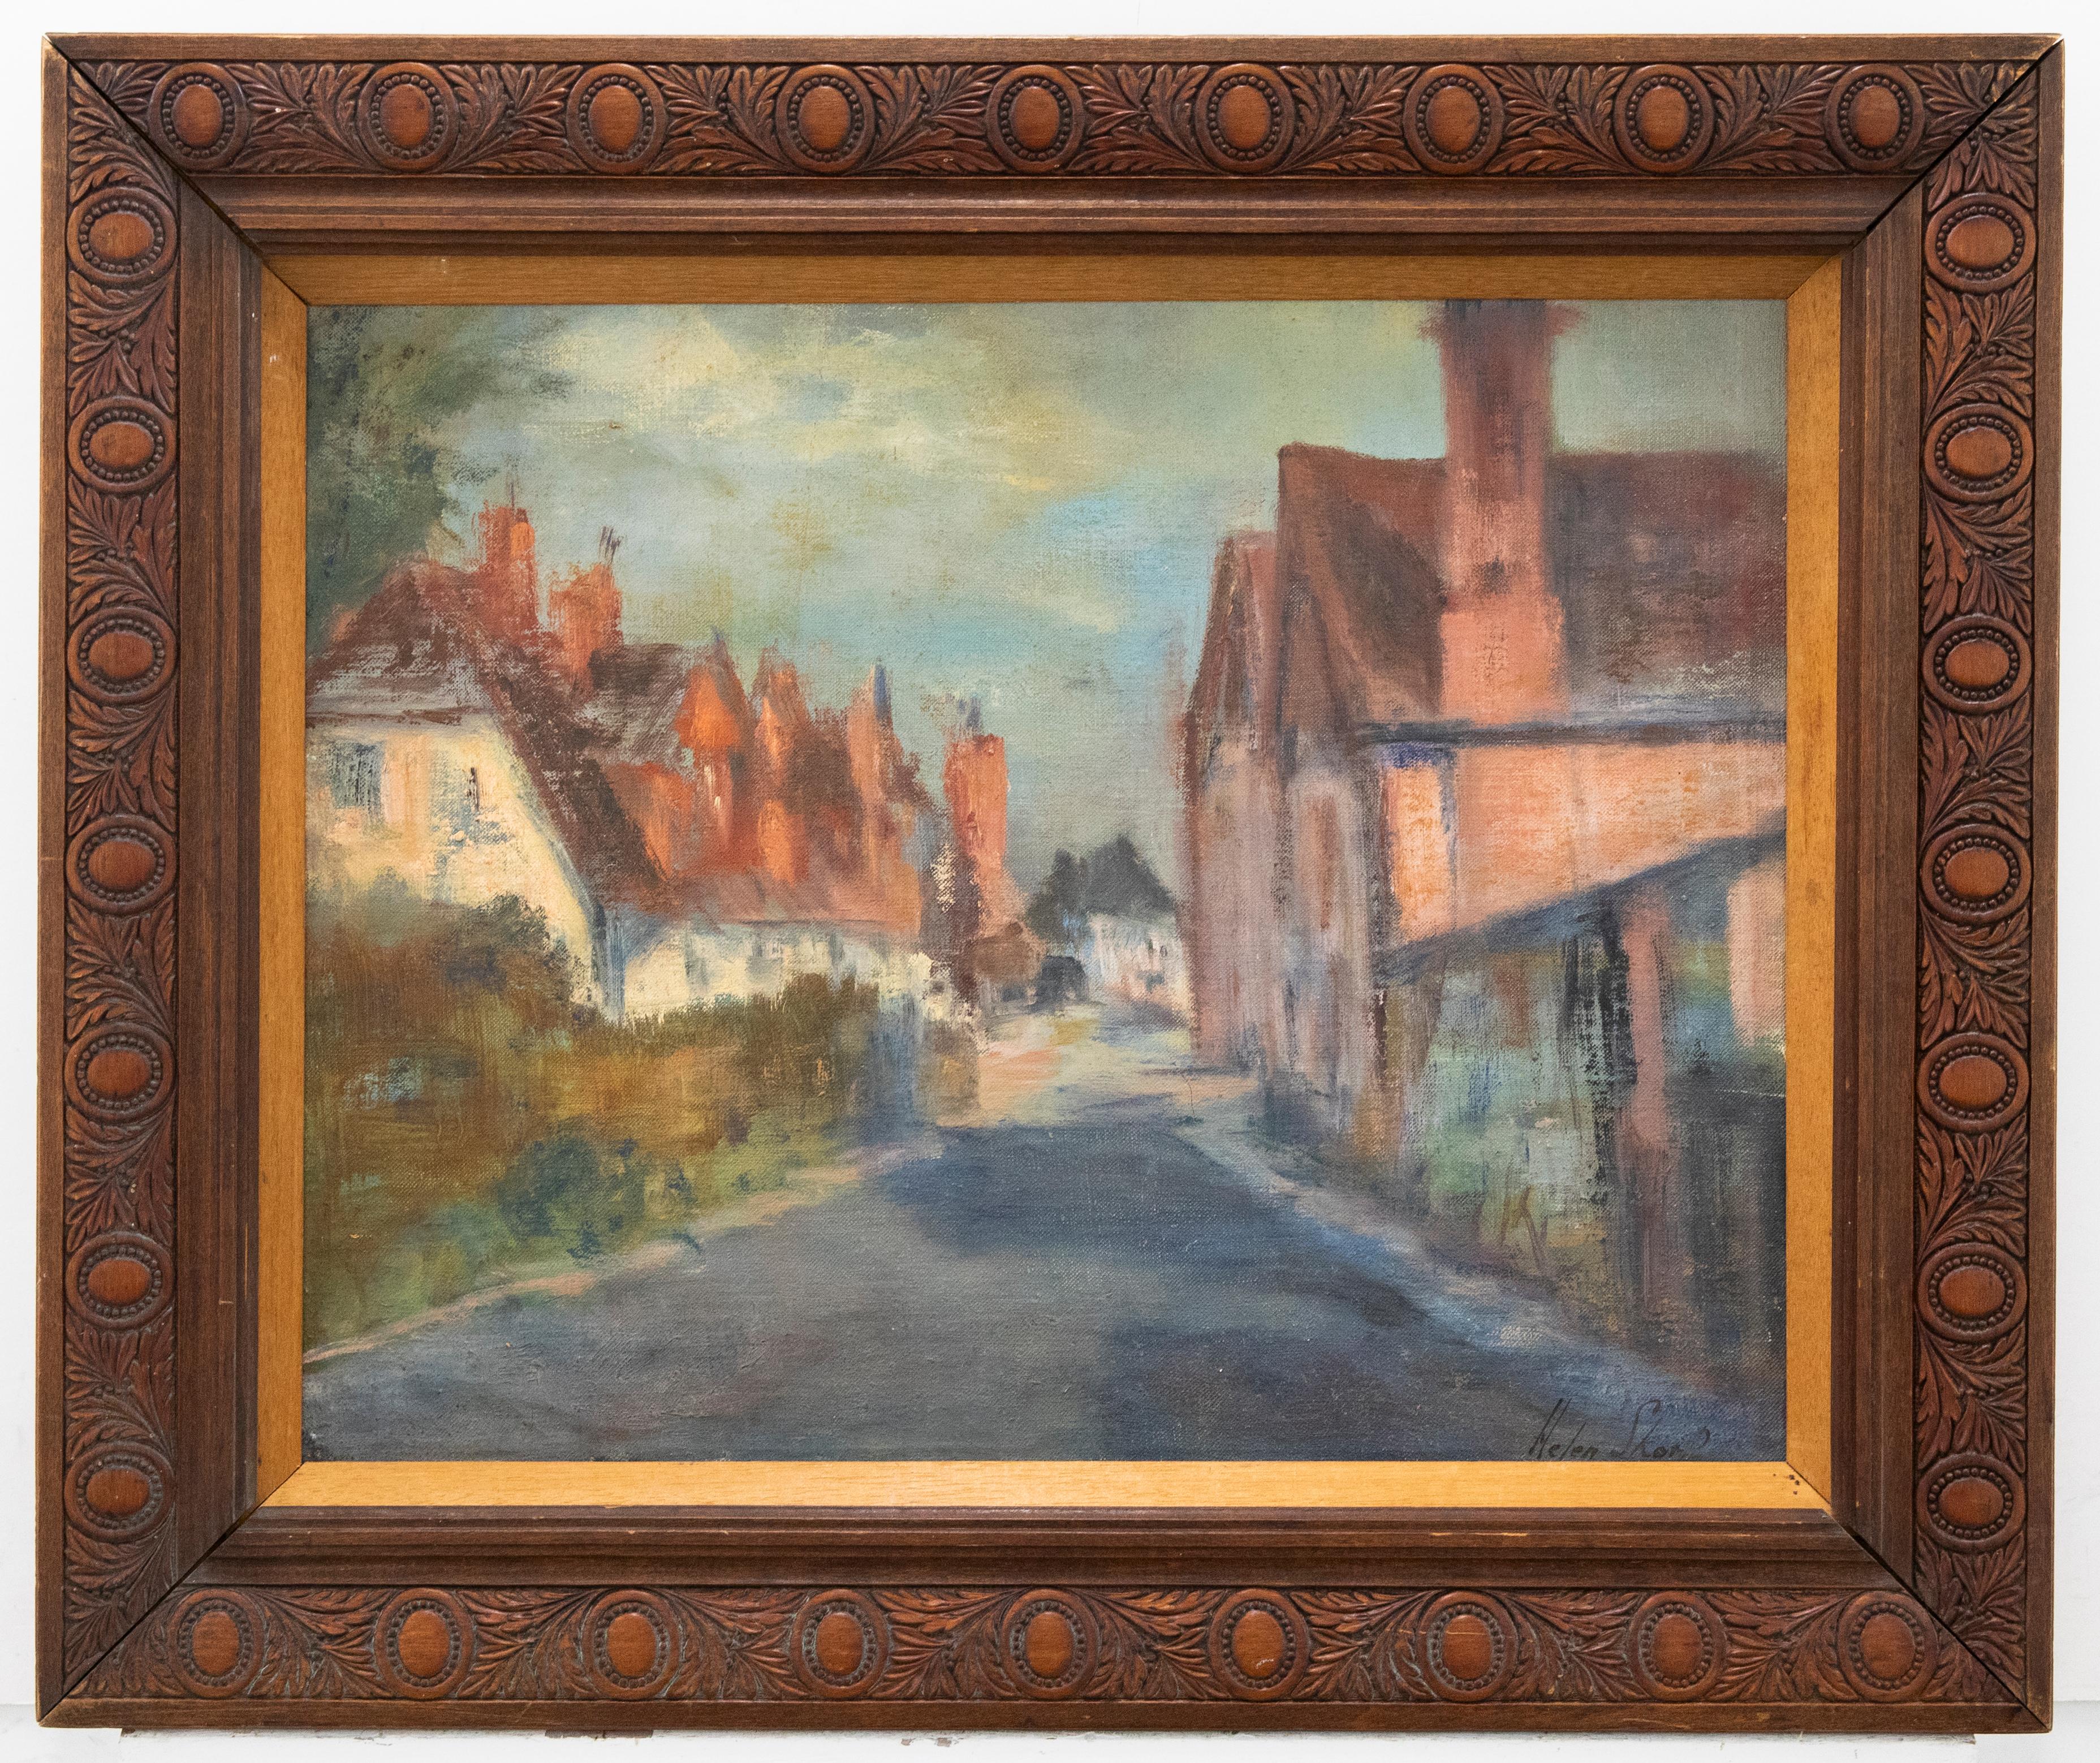 A charming impressionist study of a quiet street lined with cottages. The artist captures the scene in a soft palette, letting the colours blend into each other to create a gently, hazy scene. Signed to the lower right. Presented in a wooden frame